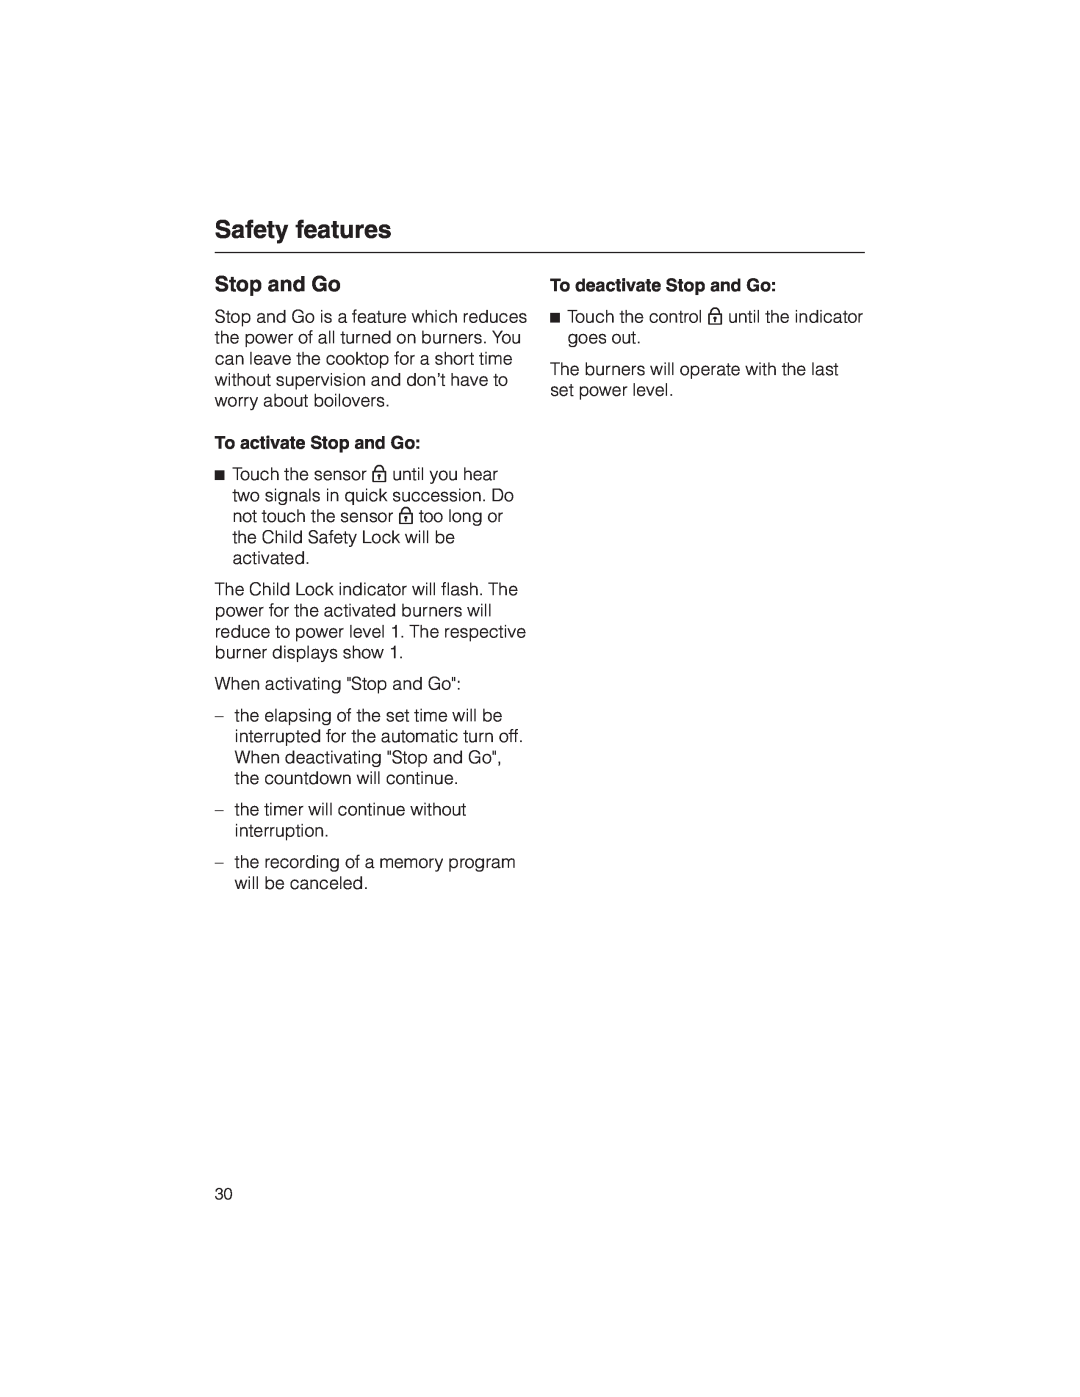 Miele KM 5773 installation instructions To activate Stop and Go, To deactivate Stop and Go, Safety features 